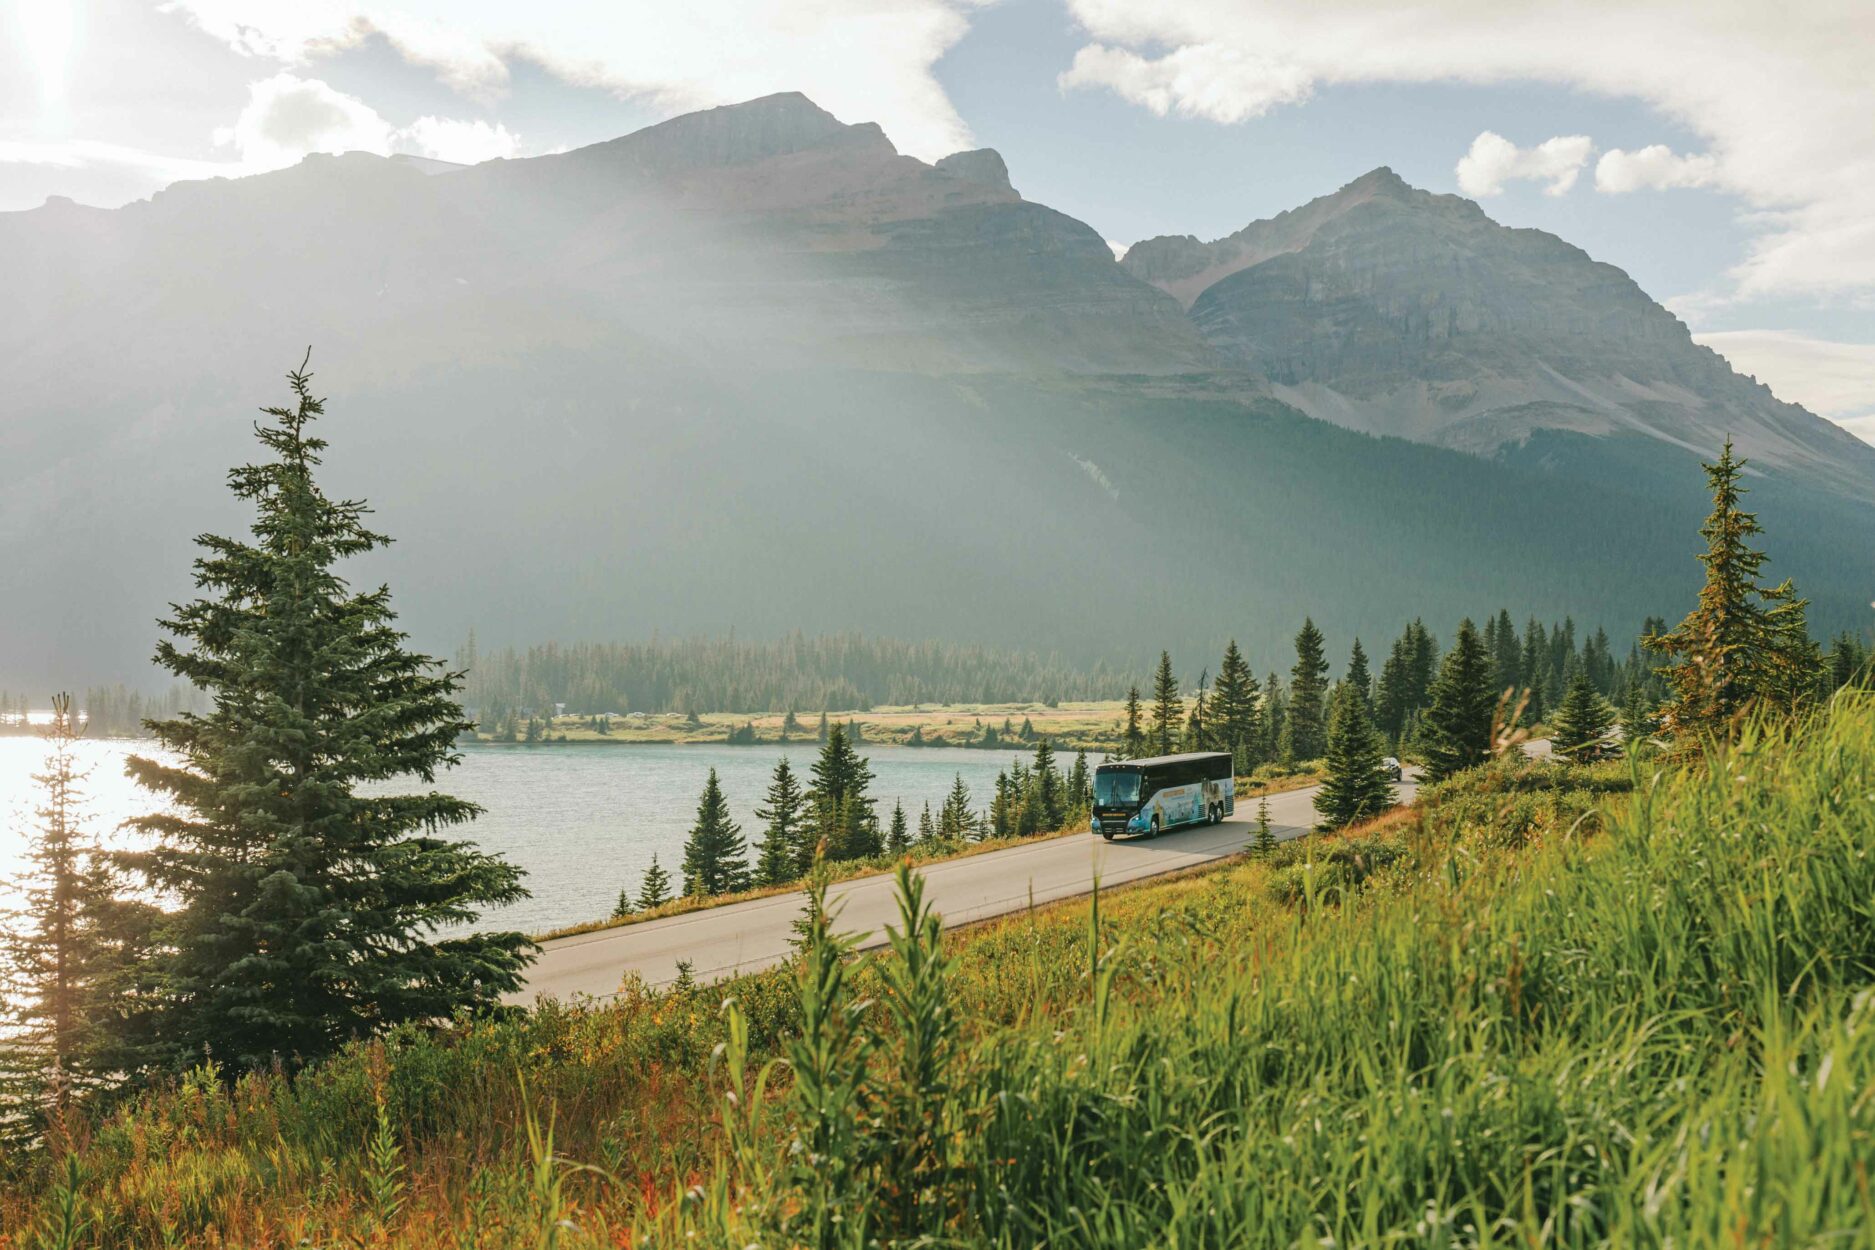 Canadian Rockies Travel Guide: How do you access the most iconic locations in the Canadian Rockies? on Where Rockies